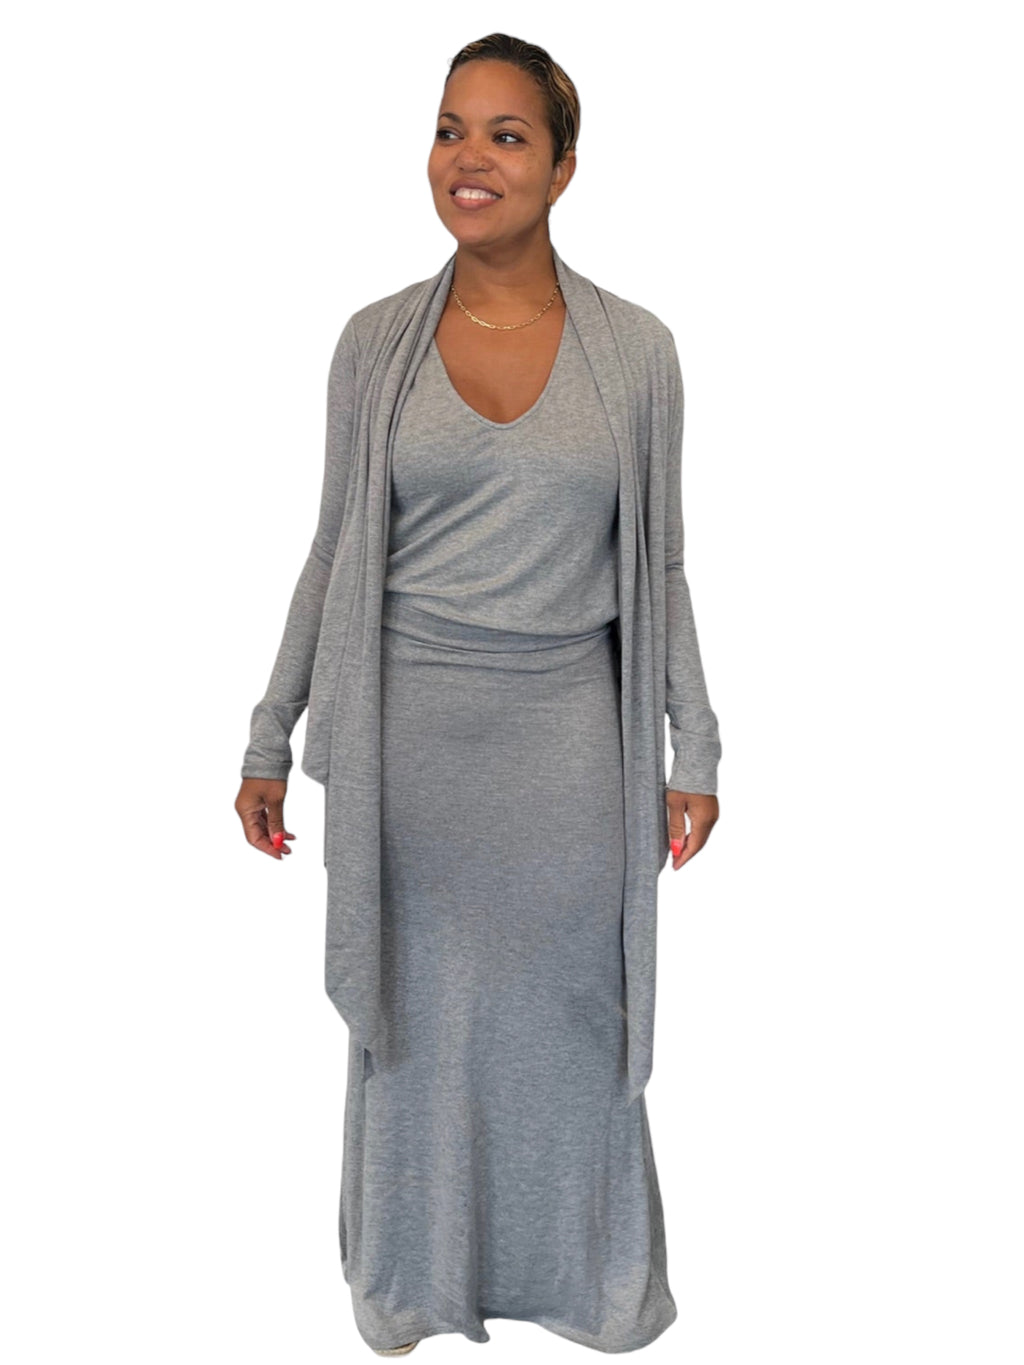 Blair- Heather Grey Long Fitted Skirt - TN-153